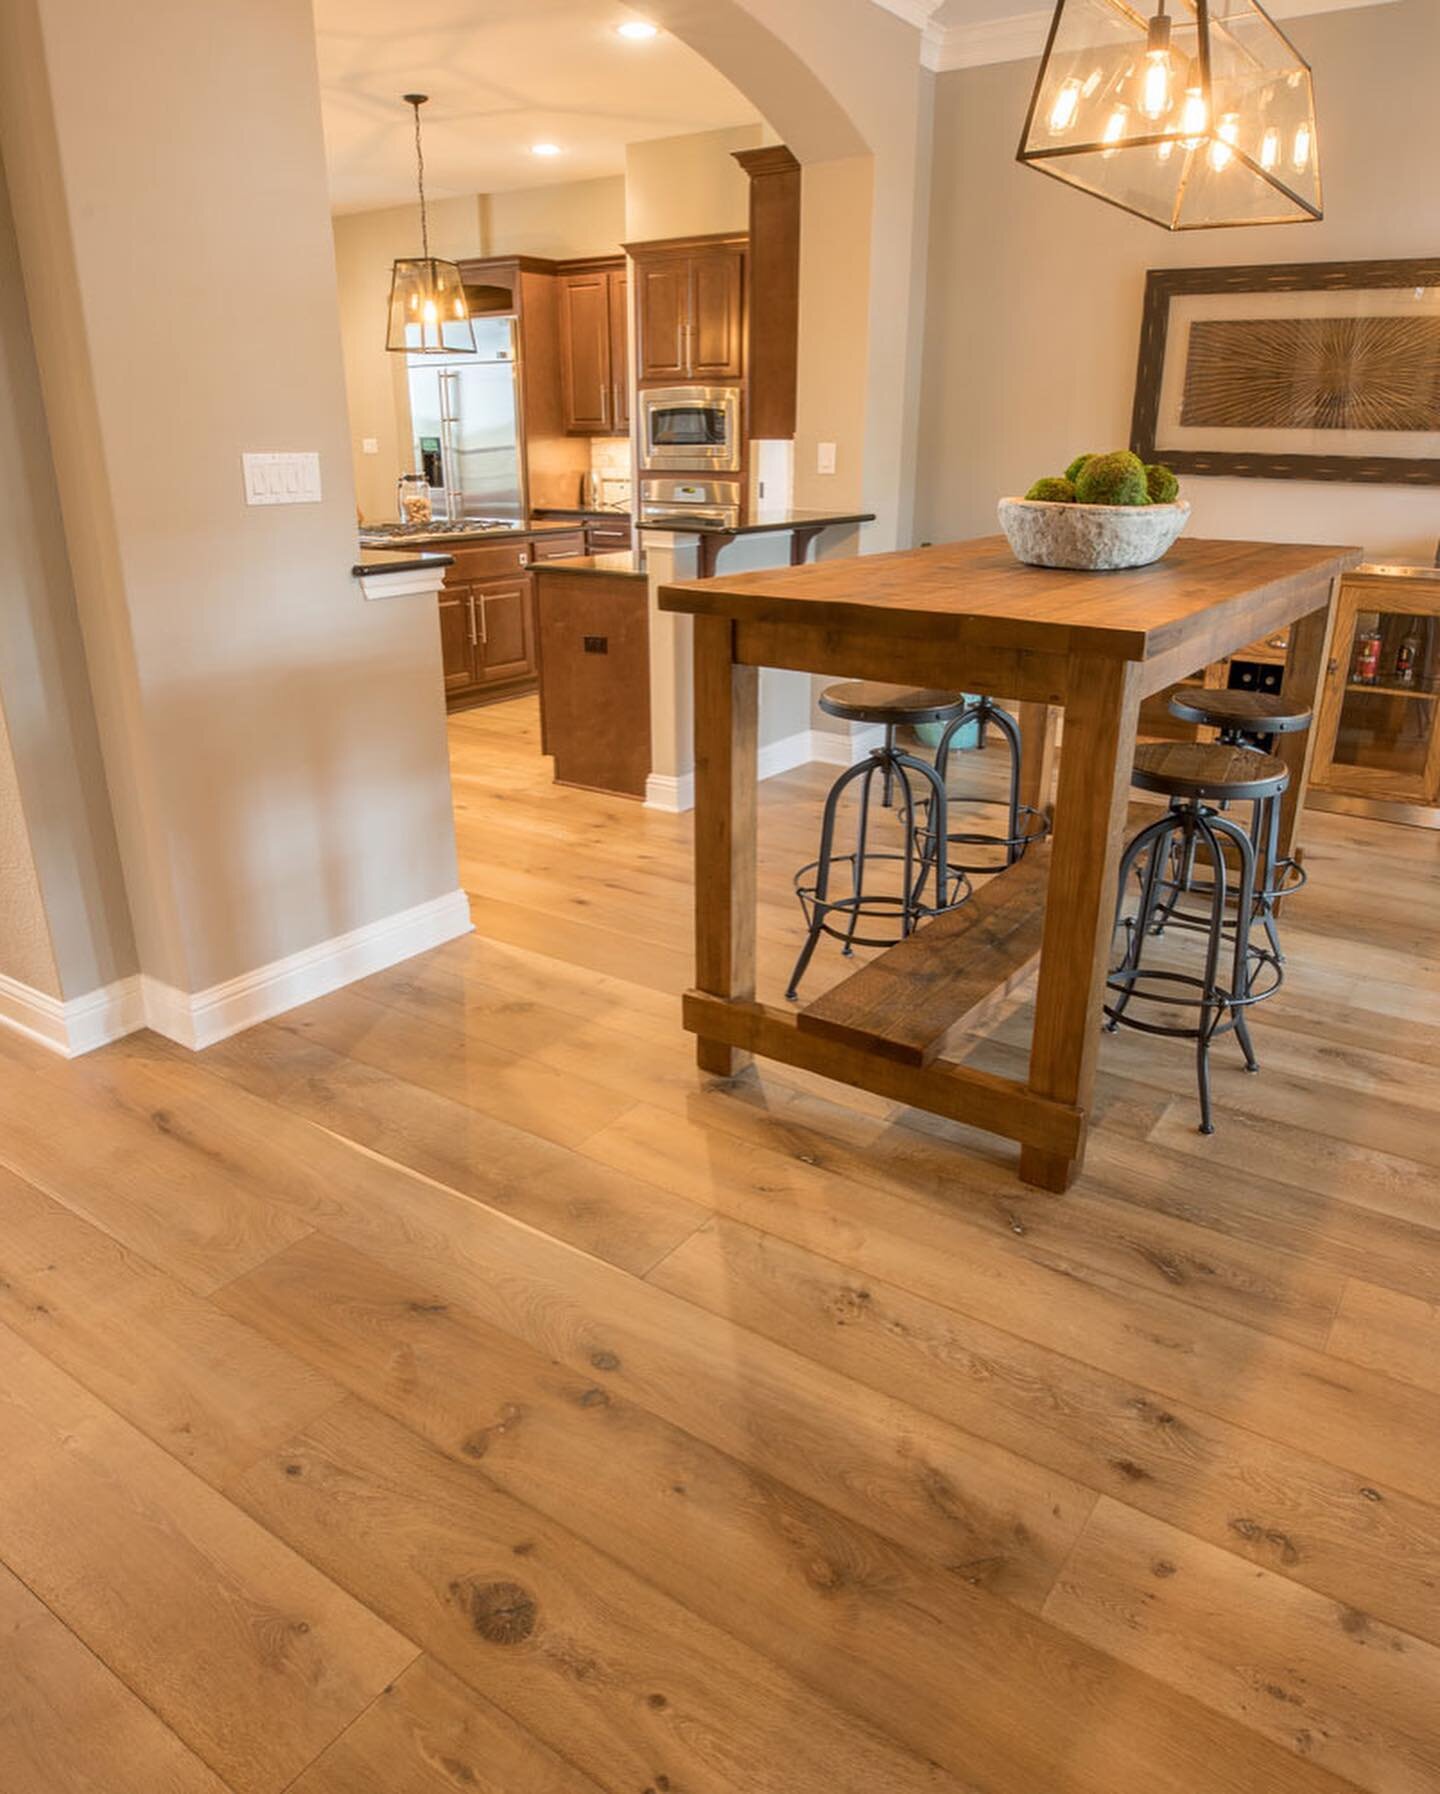 🪵🥰 #flashbackfriday 
Like what you see? Contact us for a free bid on your next project 512-719-3555
&bull;
&bull;
&bull;
&bull;
&bull;
#flashback #interiordesign #interiordesigninspo #aesthetic #woodflooring #designinspiration #flooranddecor